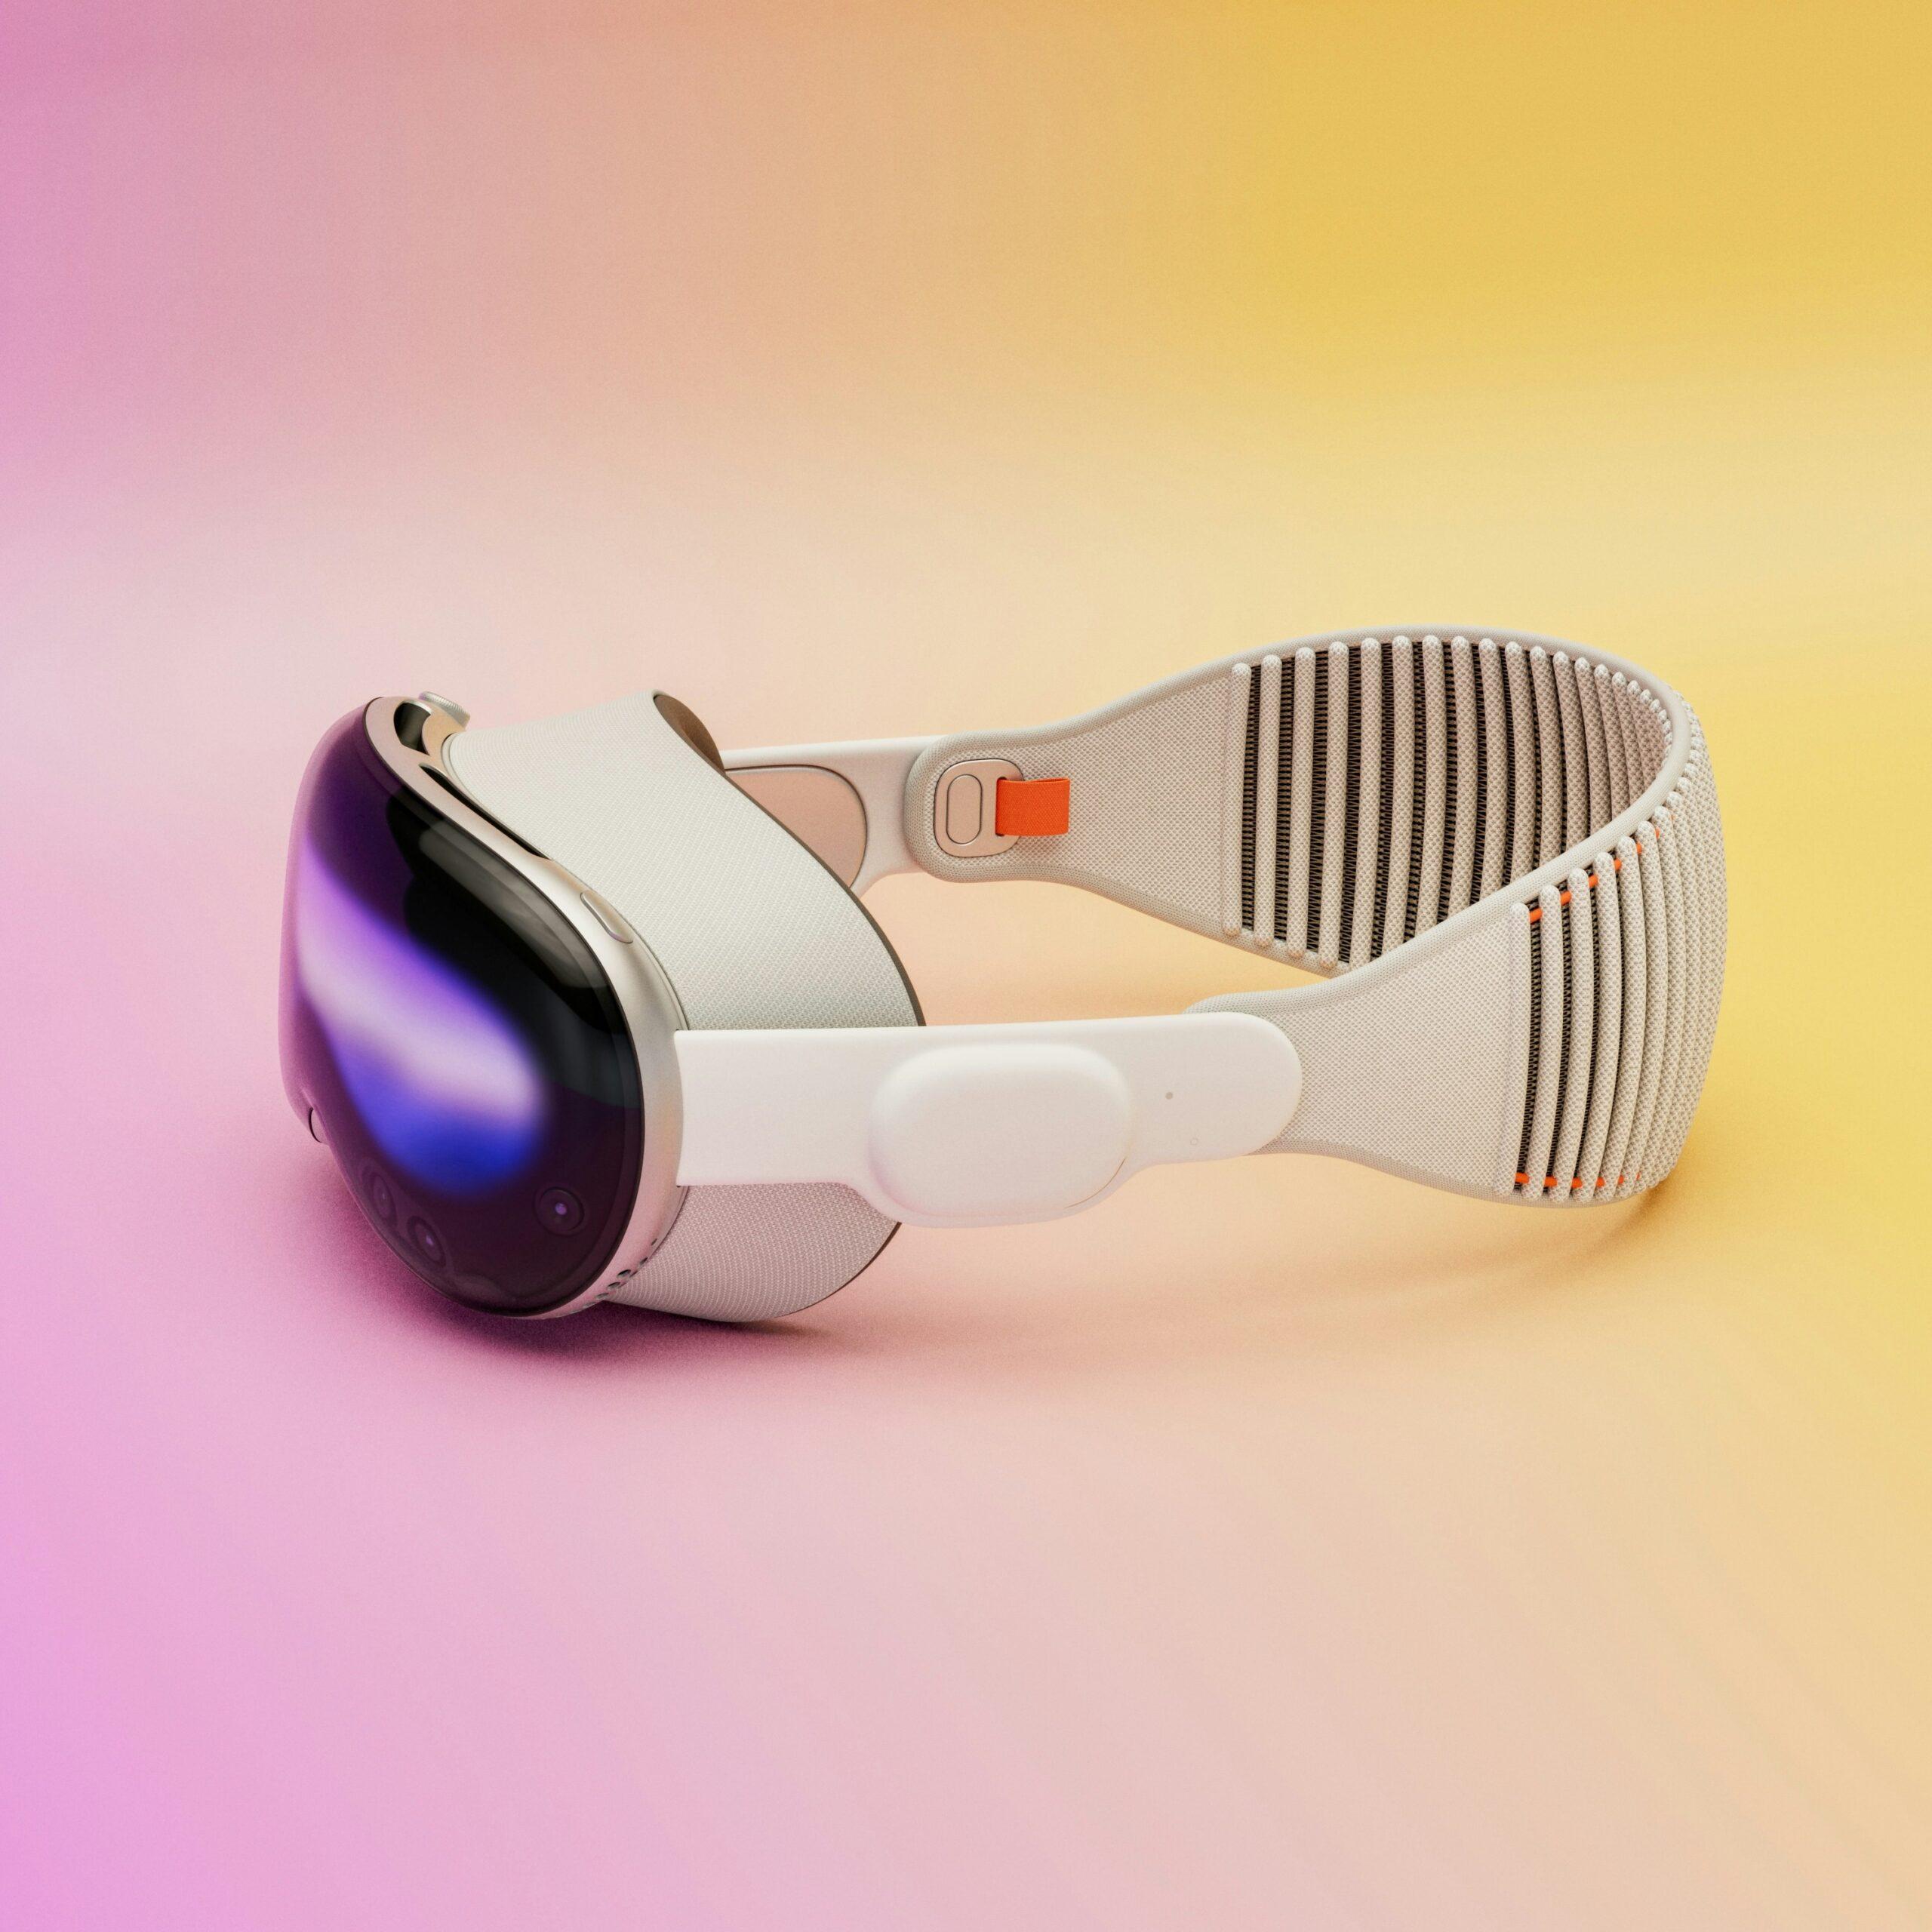 Apple Vision Pro VR headset on a colorful background